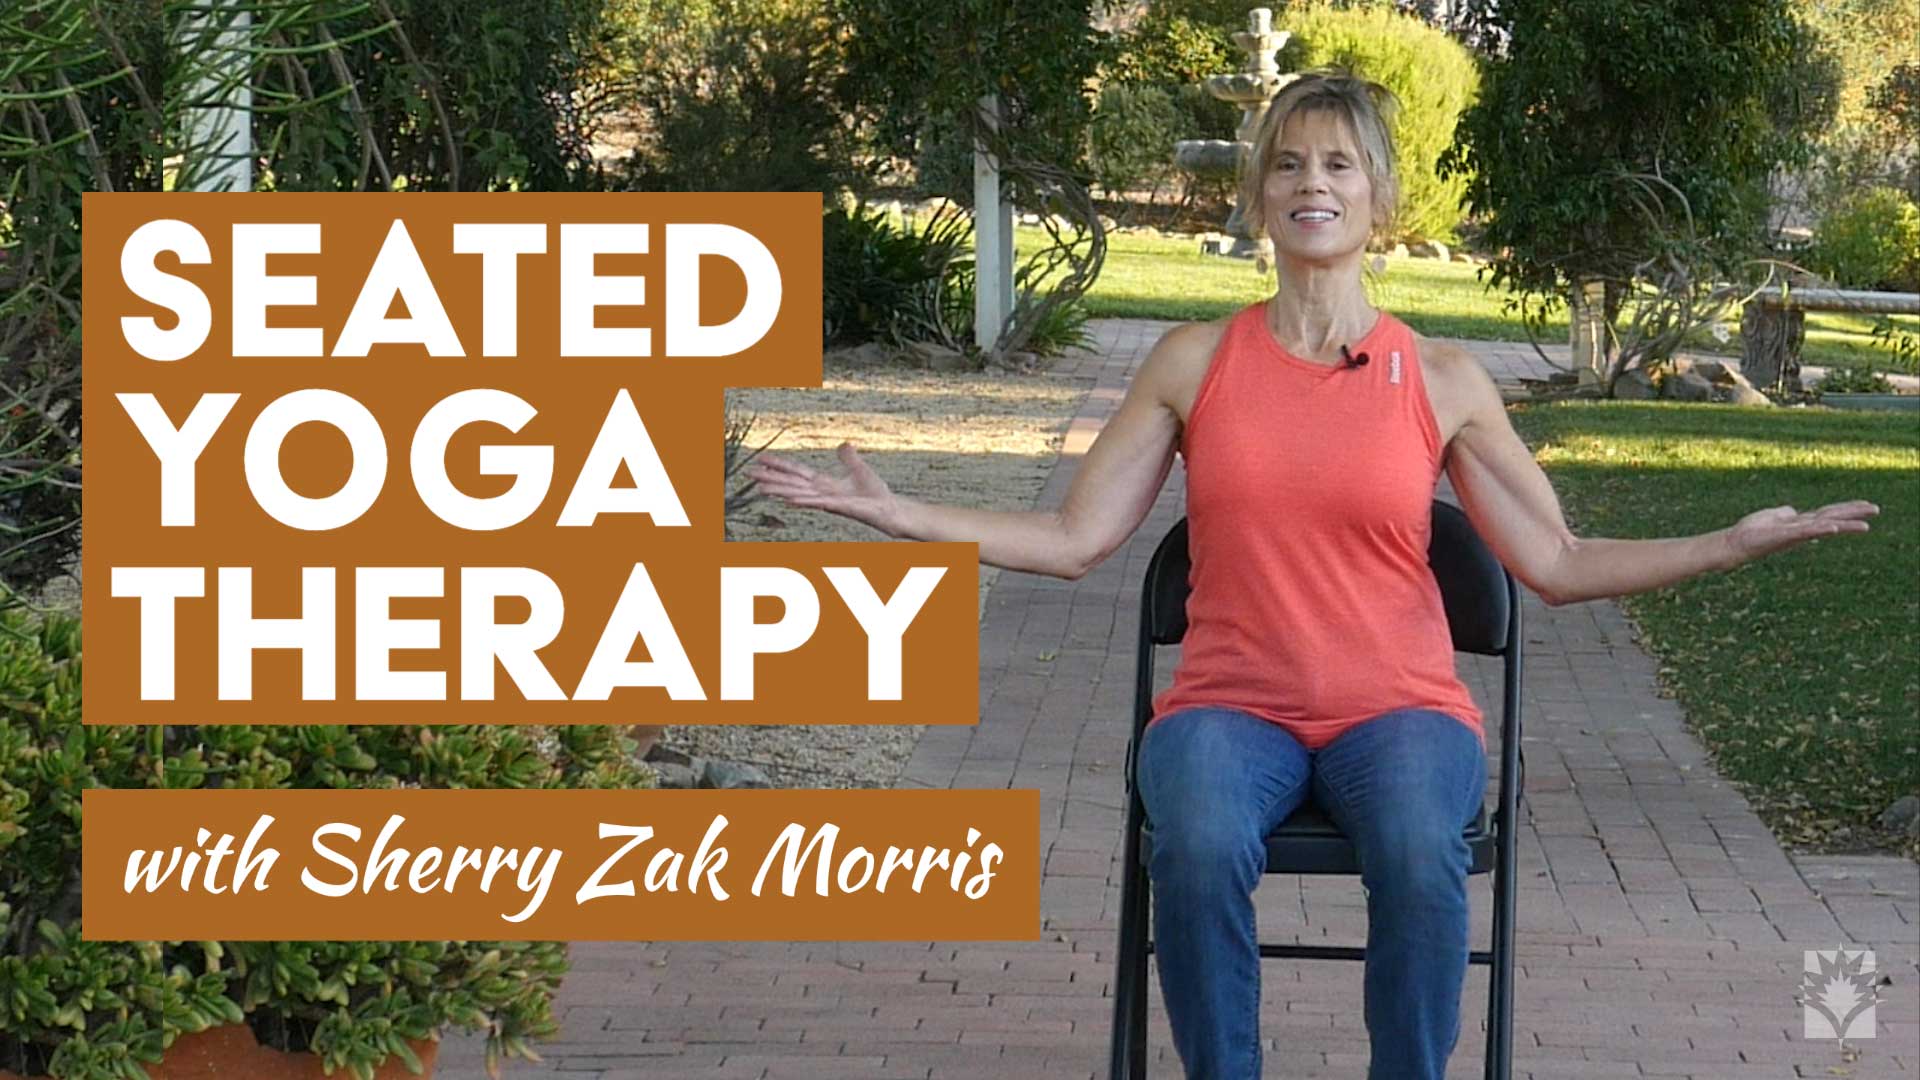 Seated Yoga Therapy with Sherry Zak Morris